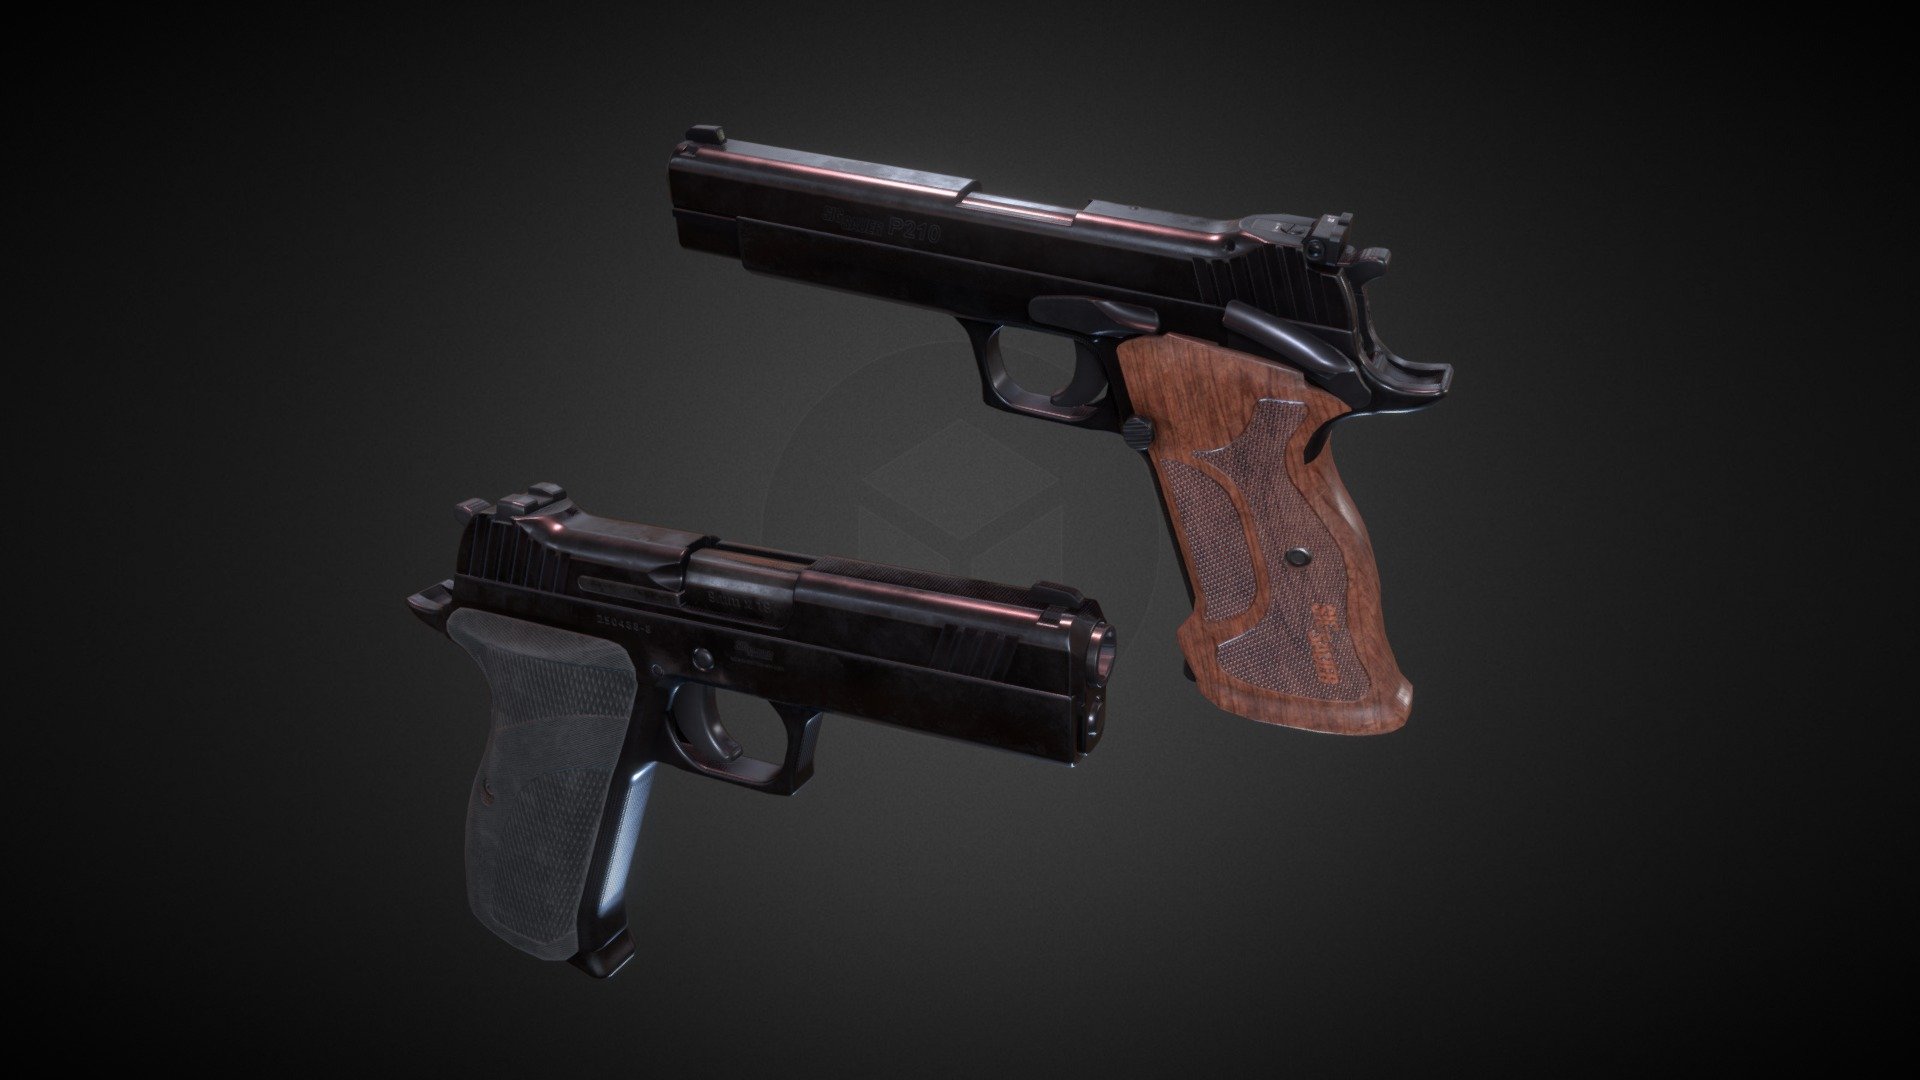 Updated version of popular P210 pistol from Sig Sauer. With two version to choose. Brand new Carrier variant and more classic Target with wooden grip and longer barrel.  

Both models are rigged and have 2 PBR materials in 4K. Black and stainless steel colors available.

Tris:14.5K

Verts: 7.3K  

Made in Blender 3d model